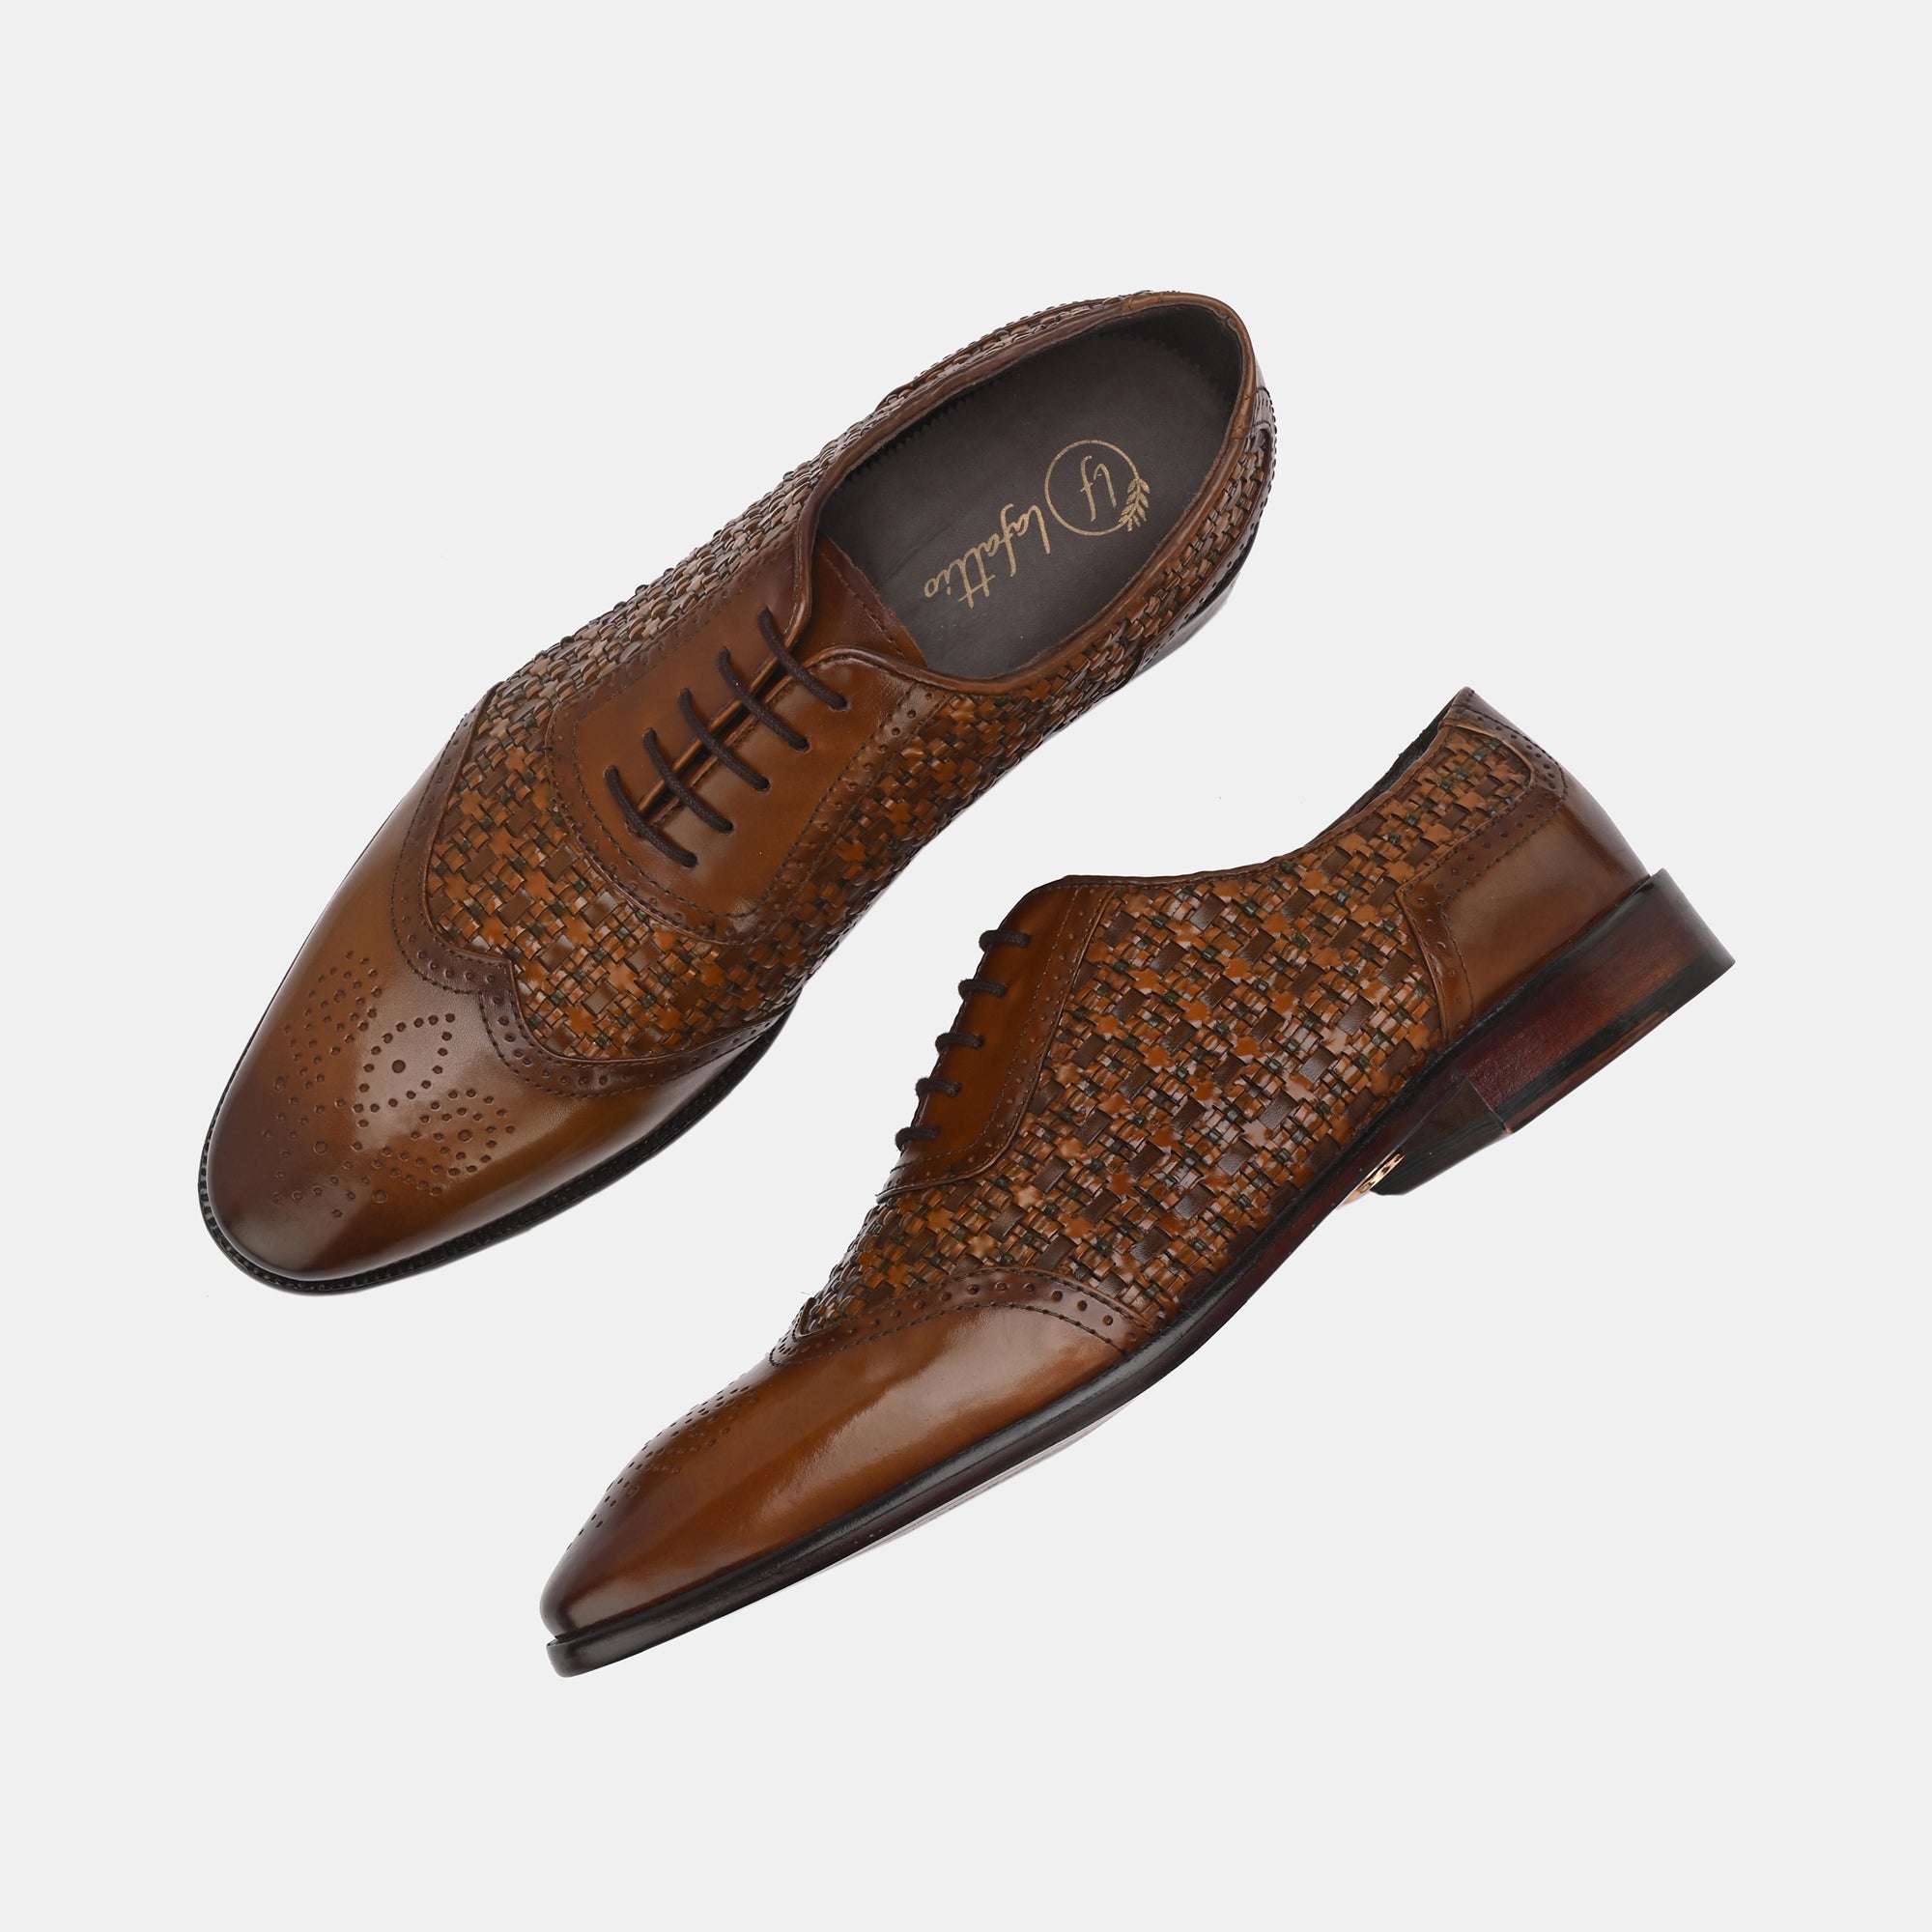 Tan Lace-Up Brogues by Lafattio